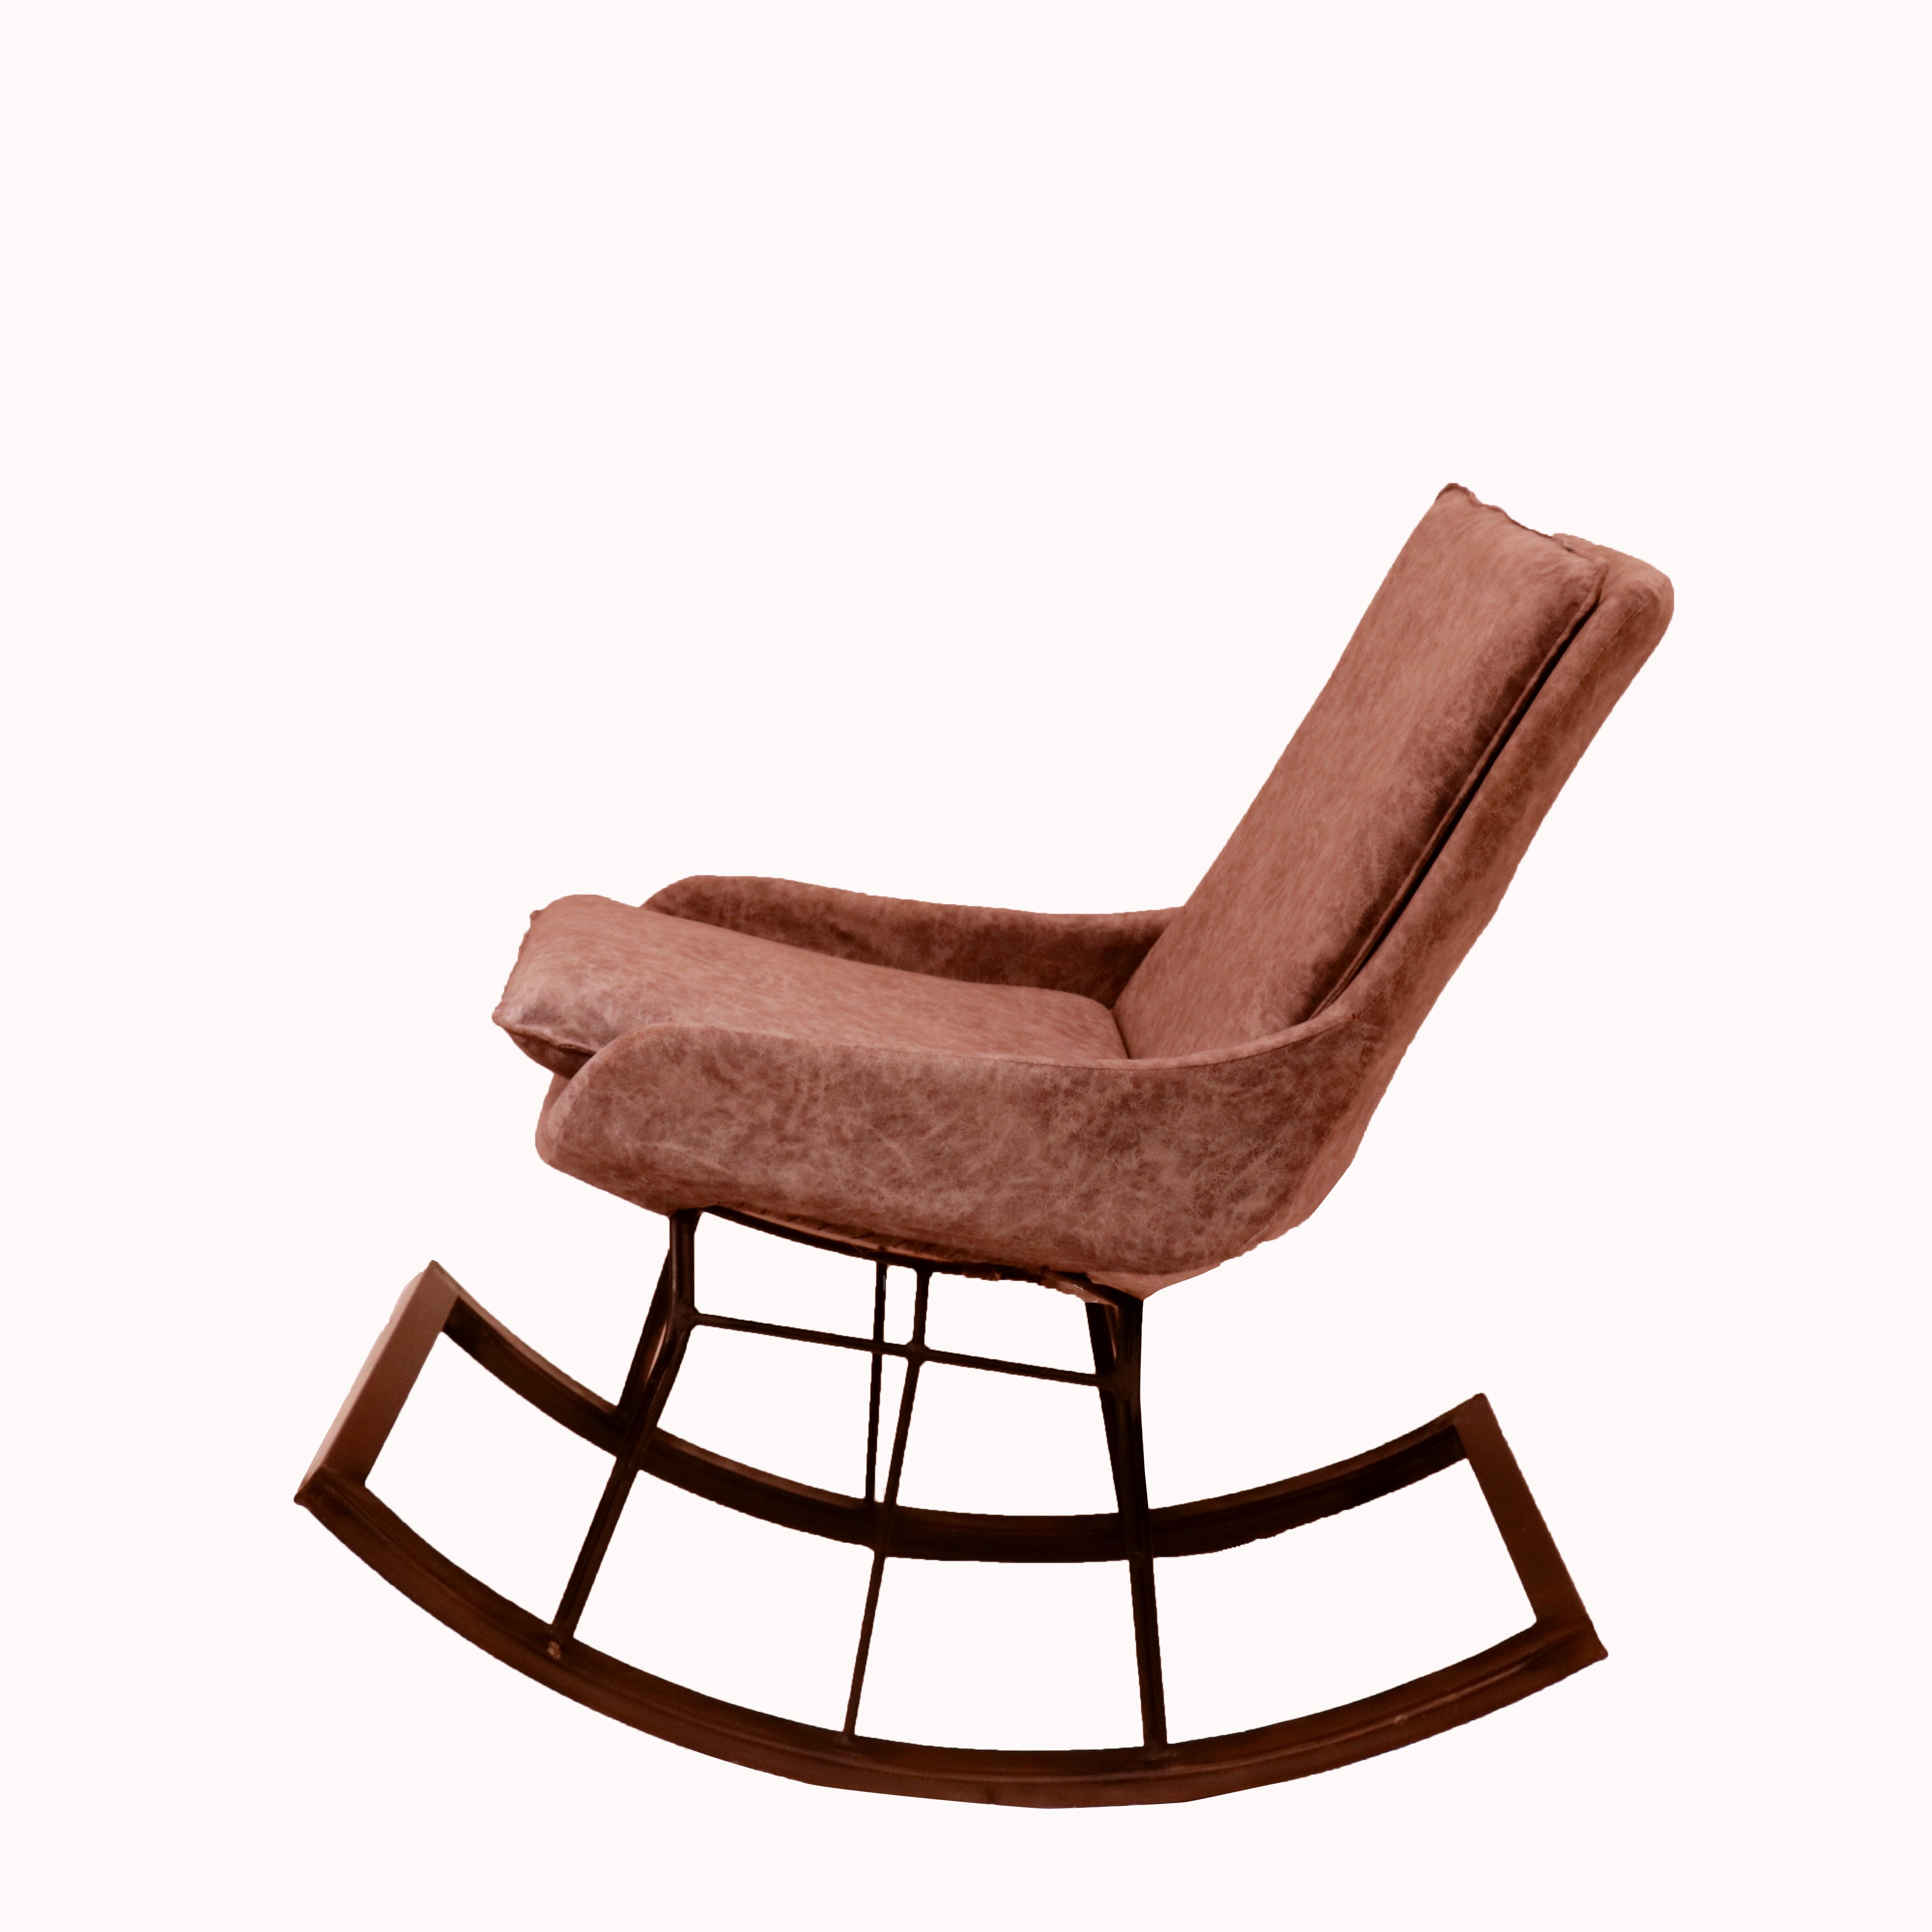 Upholstered Rocking Chair Rocking Chair